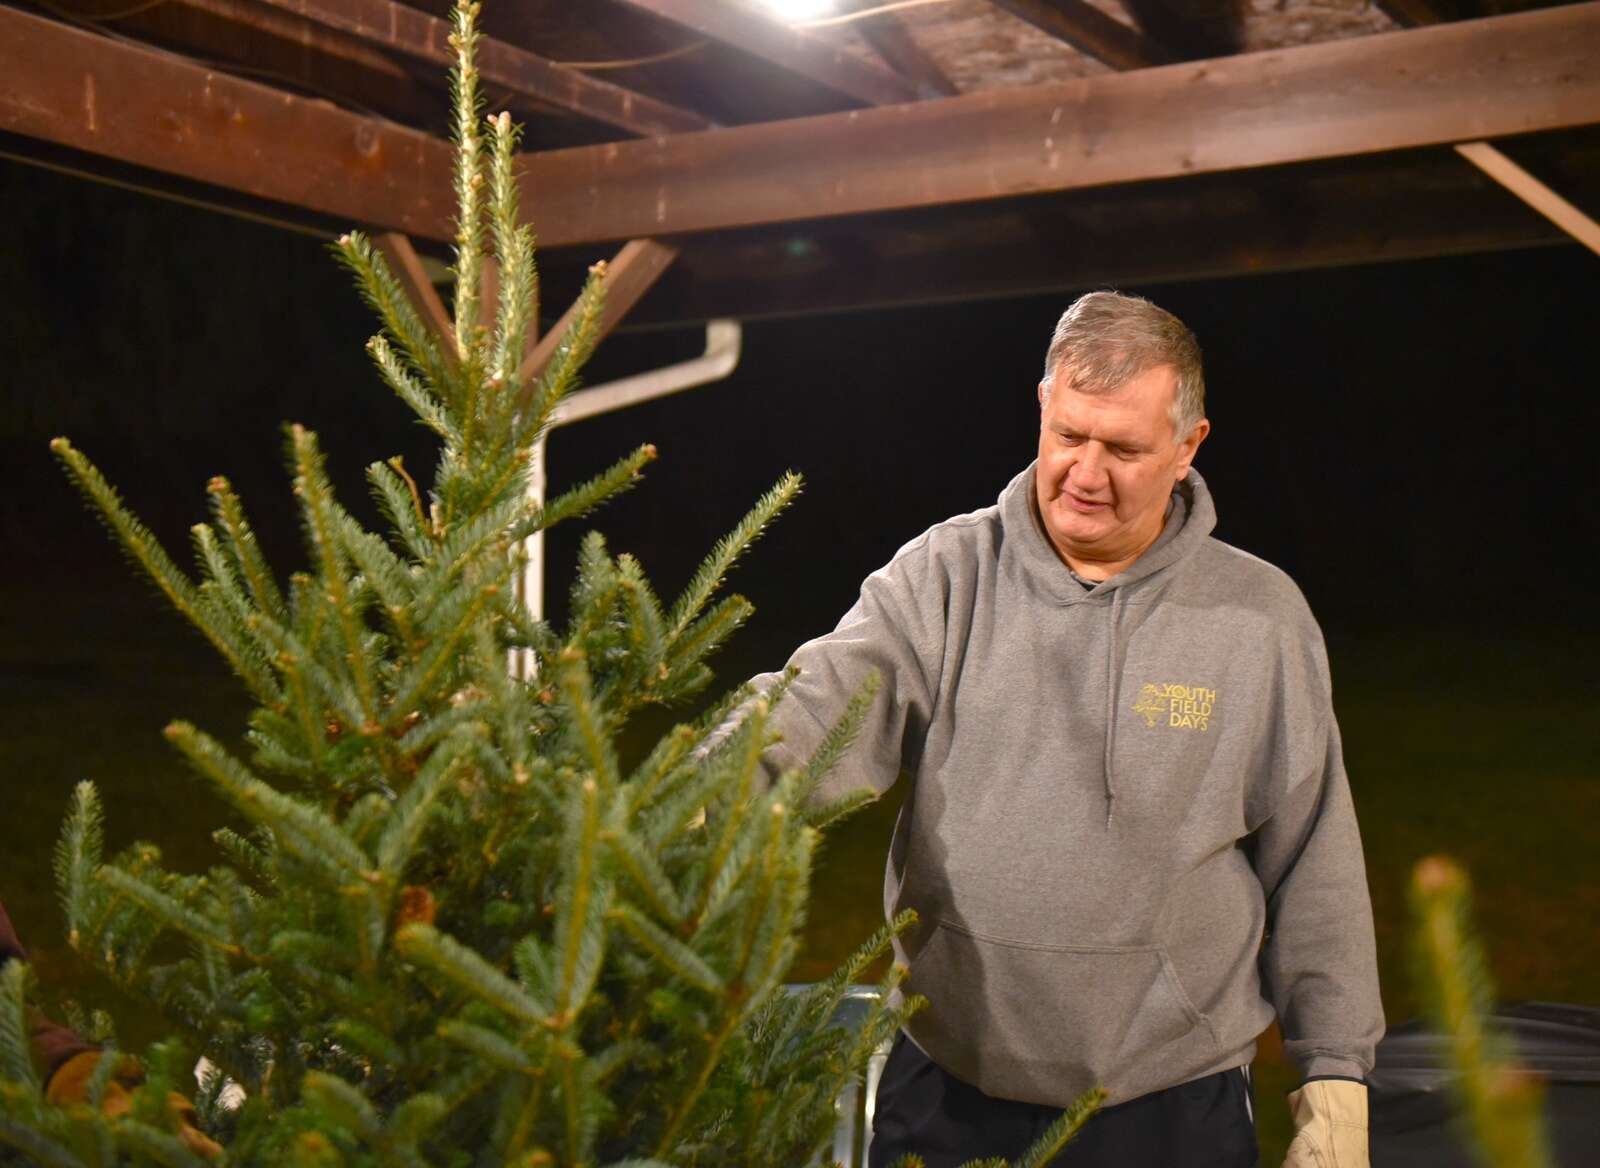 Butler Lions Club set up Christmas trees for the Butler Lions Club Christmas tree sale